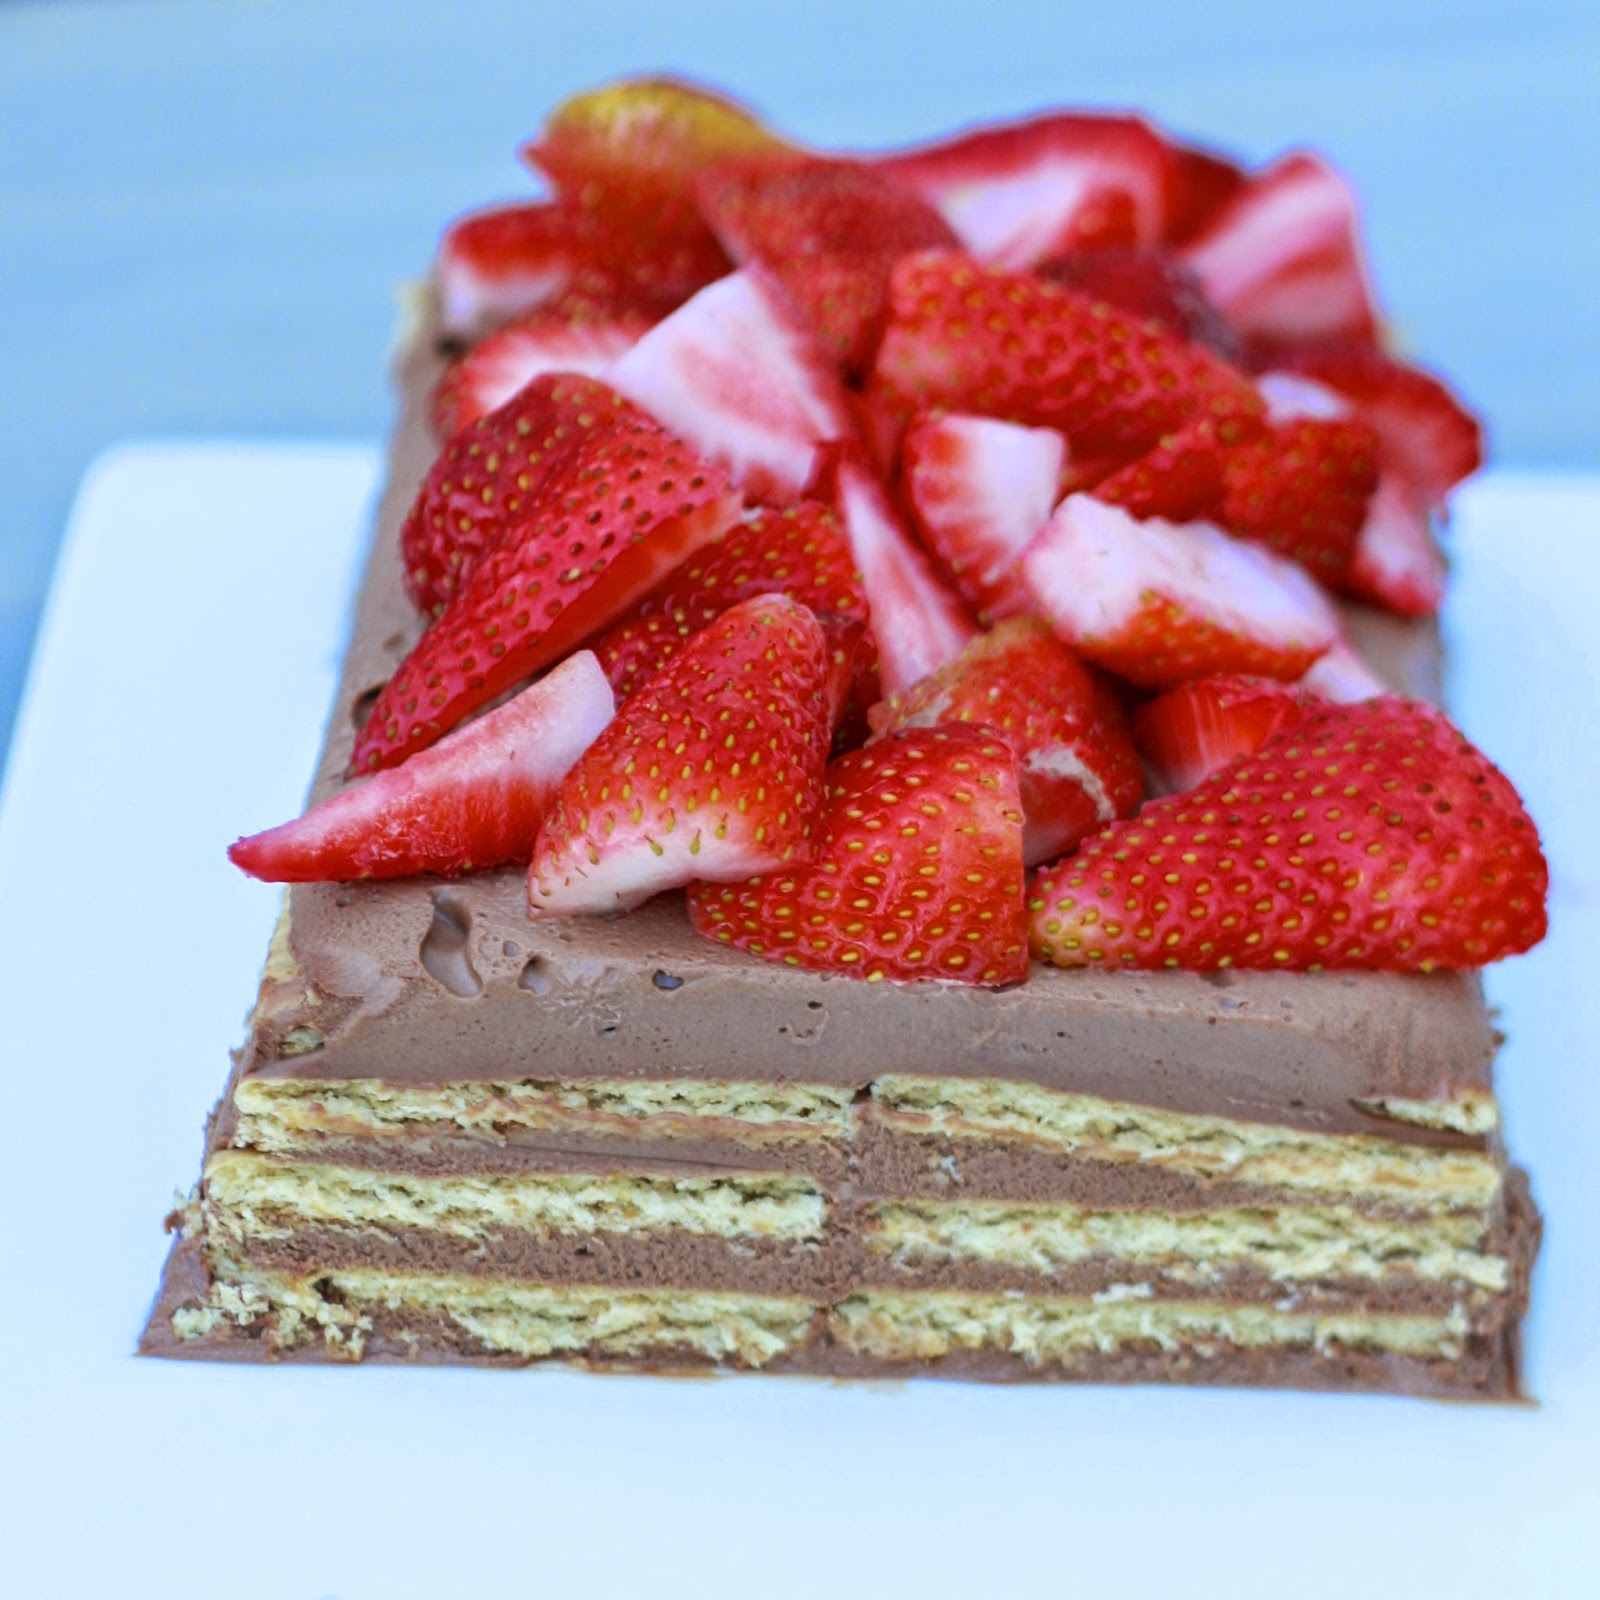 No Bake Chocolate Layered Cheesecake with Strawberries | The Sweets Life